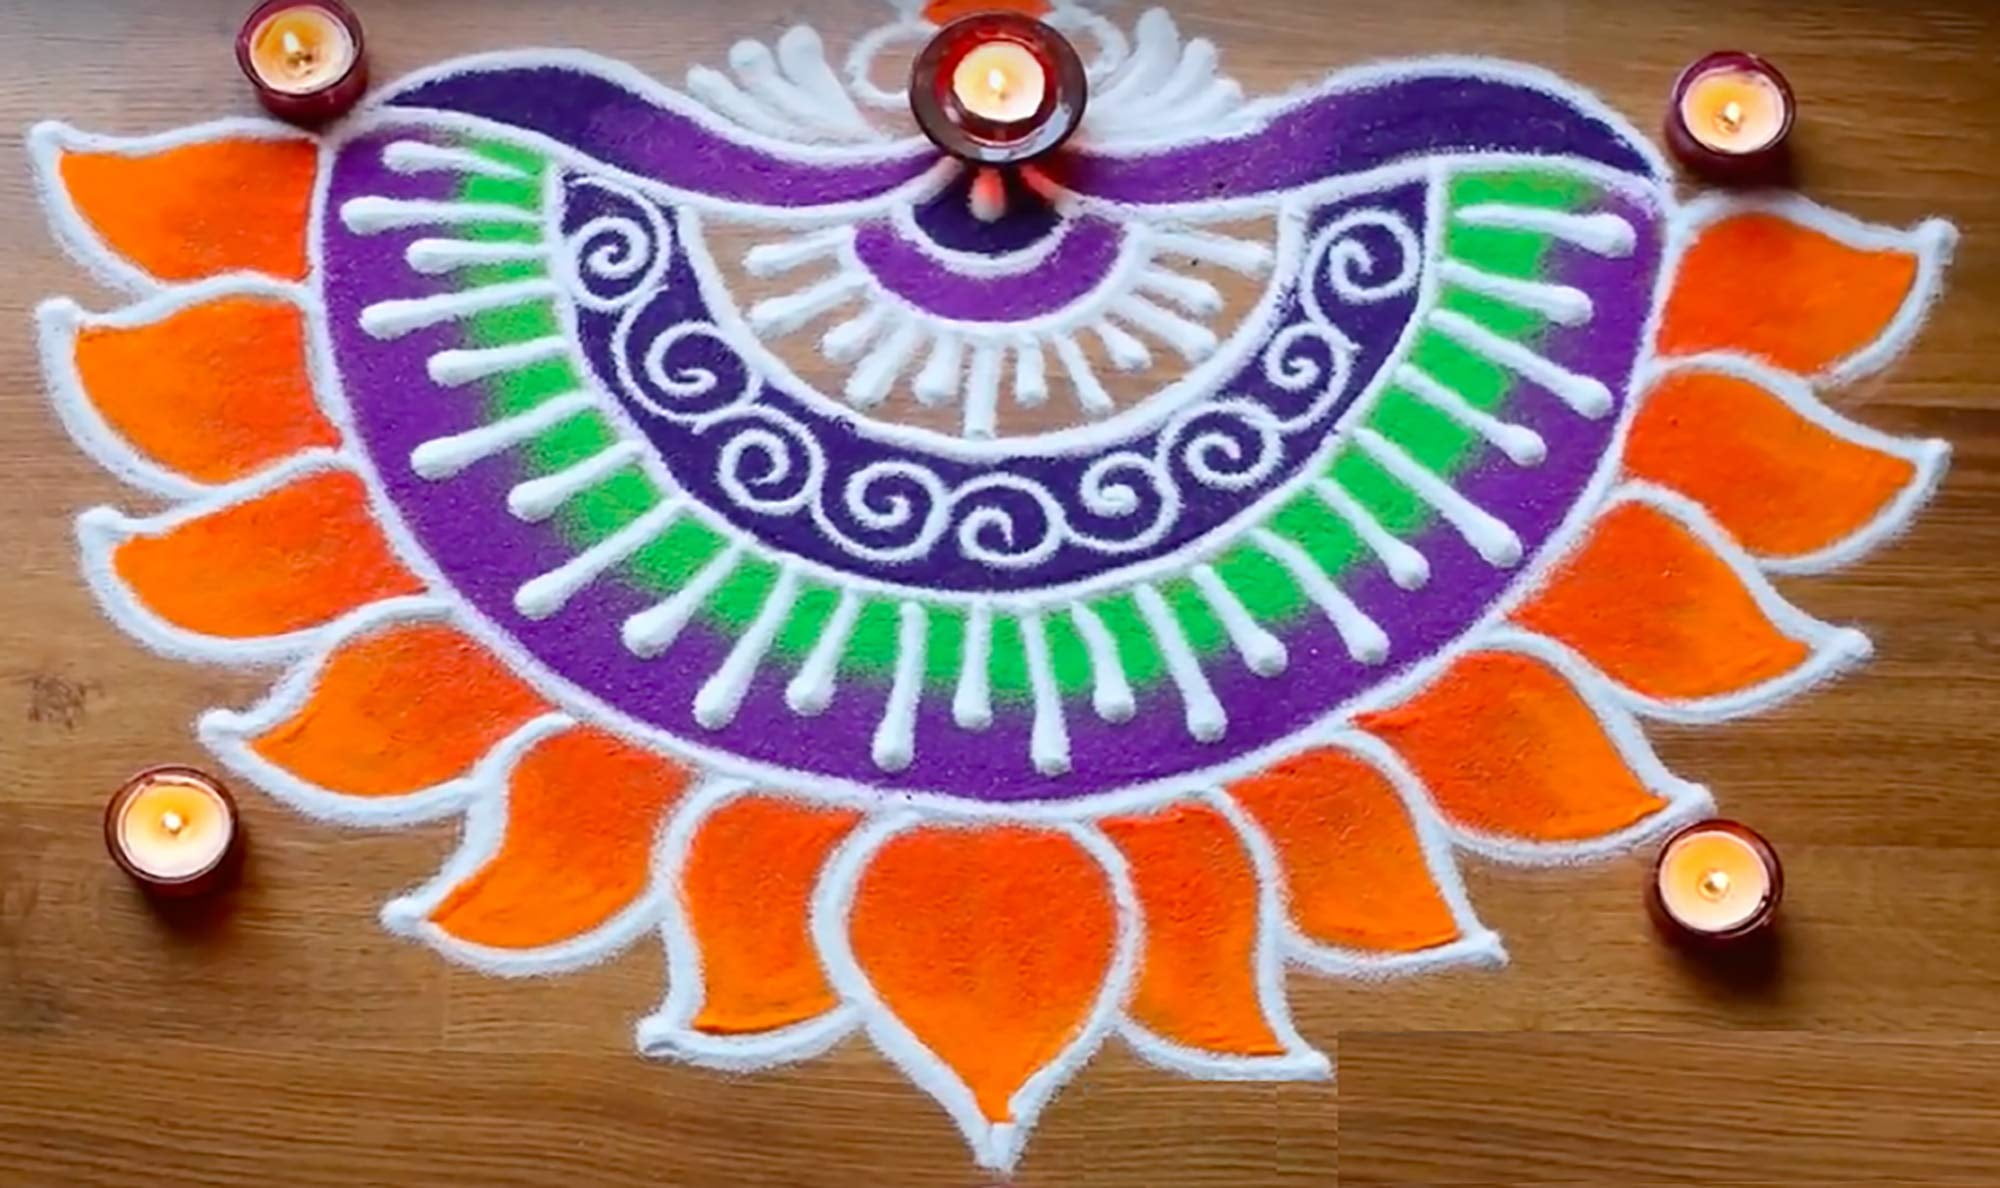  11 Pkts Rangoli Colors - Design Creativity Diwali Floor Design,  Festival Colors(Set of 11 Colors 50 gm each packs and White color 100 gm  pack), Mother's Day Gift: Home & Kitchen